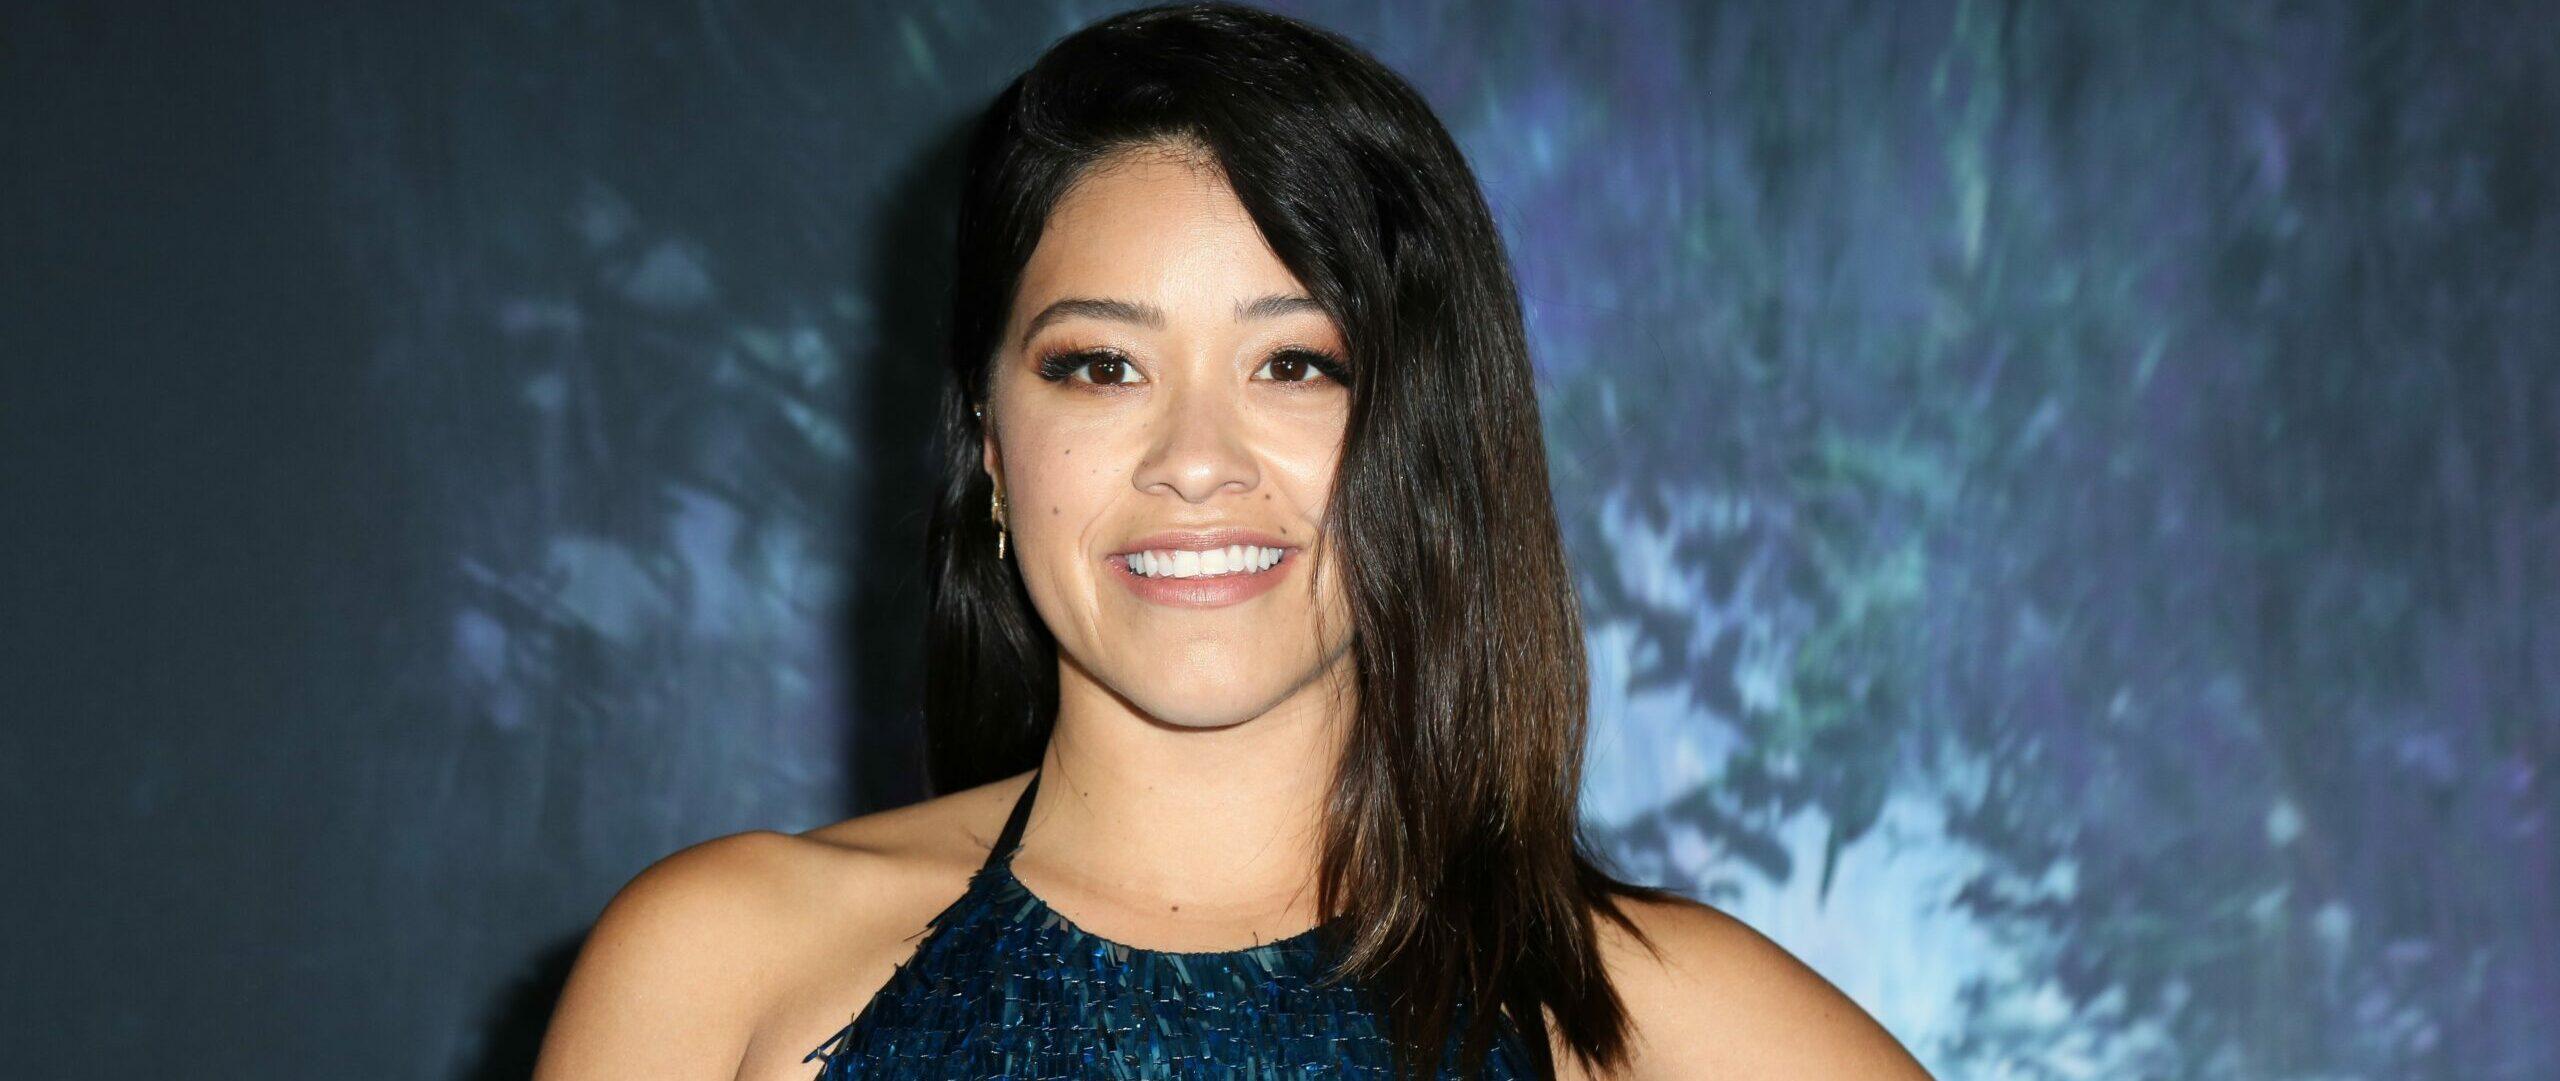 Gina Rodriguez Makes Huge Announcement On 38th Birthday